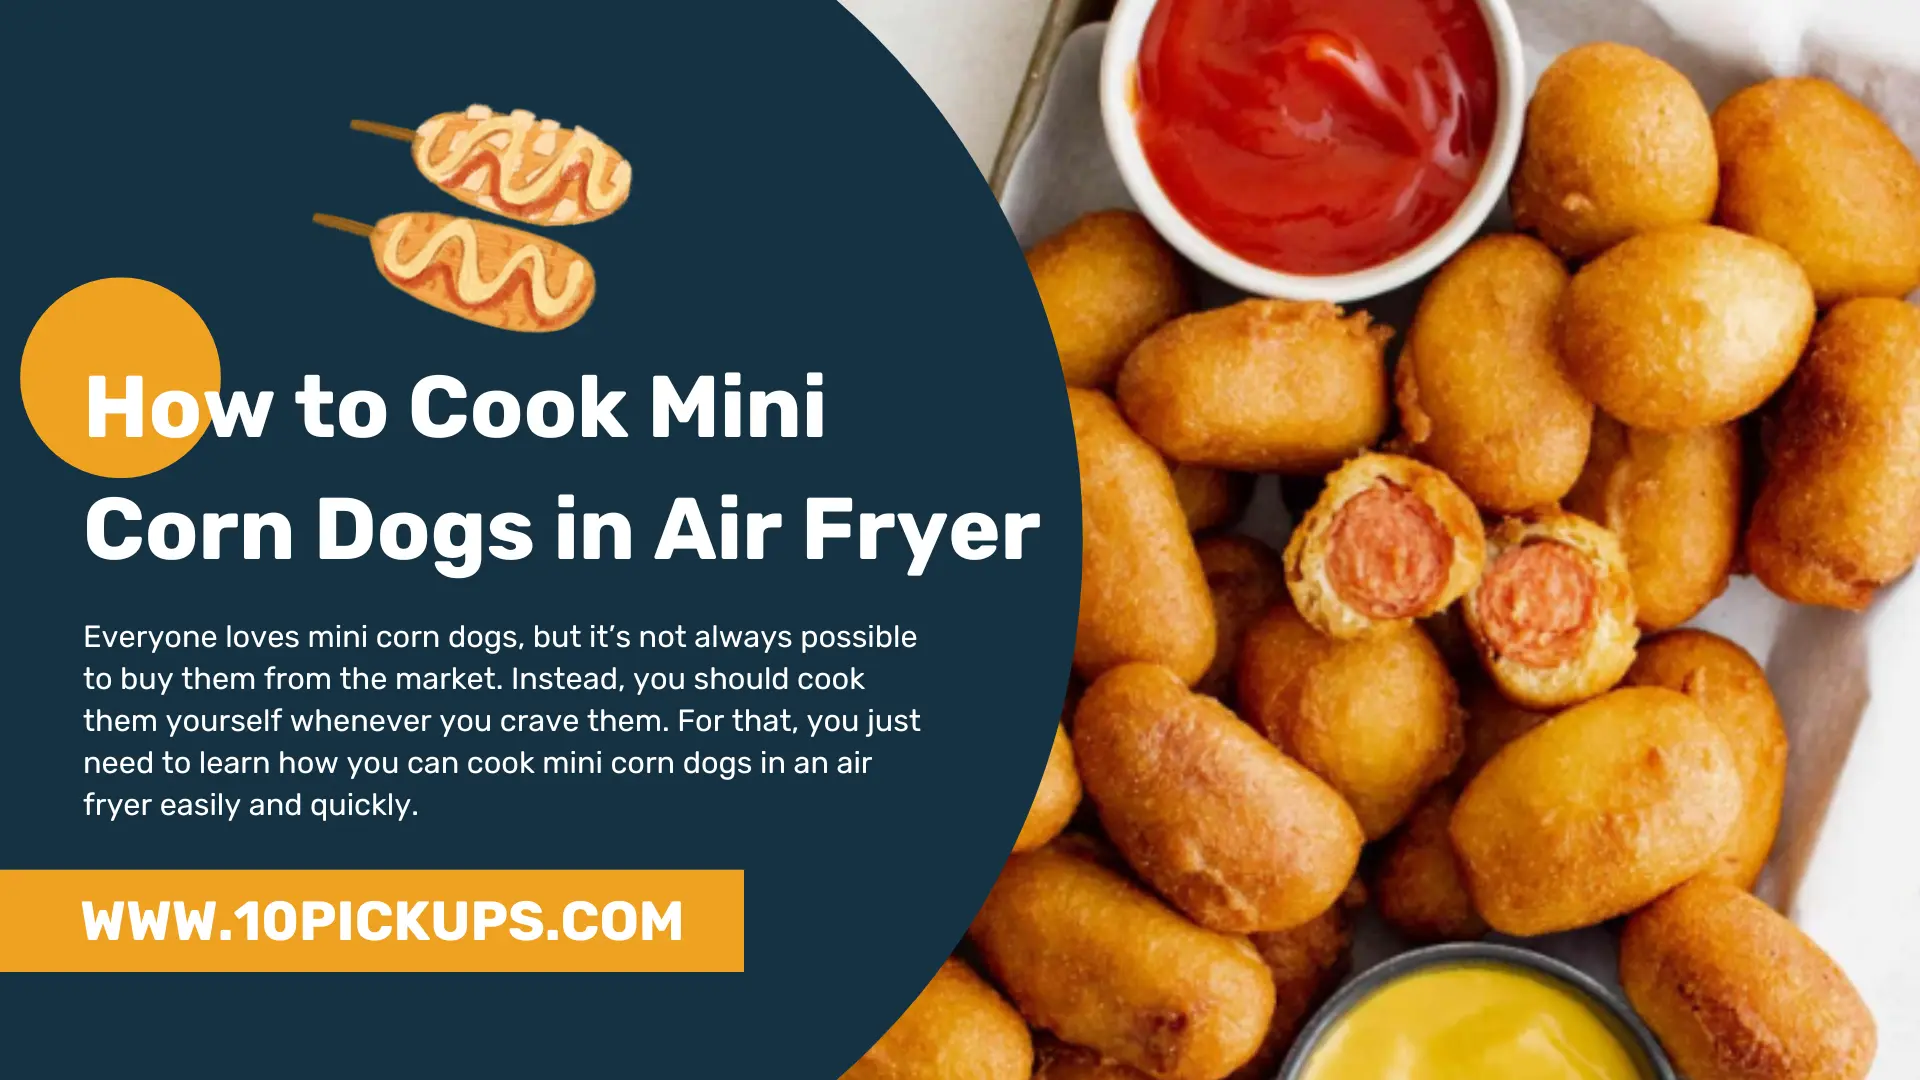 How to Cook Mini Corn Dogs in Air Fryer